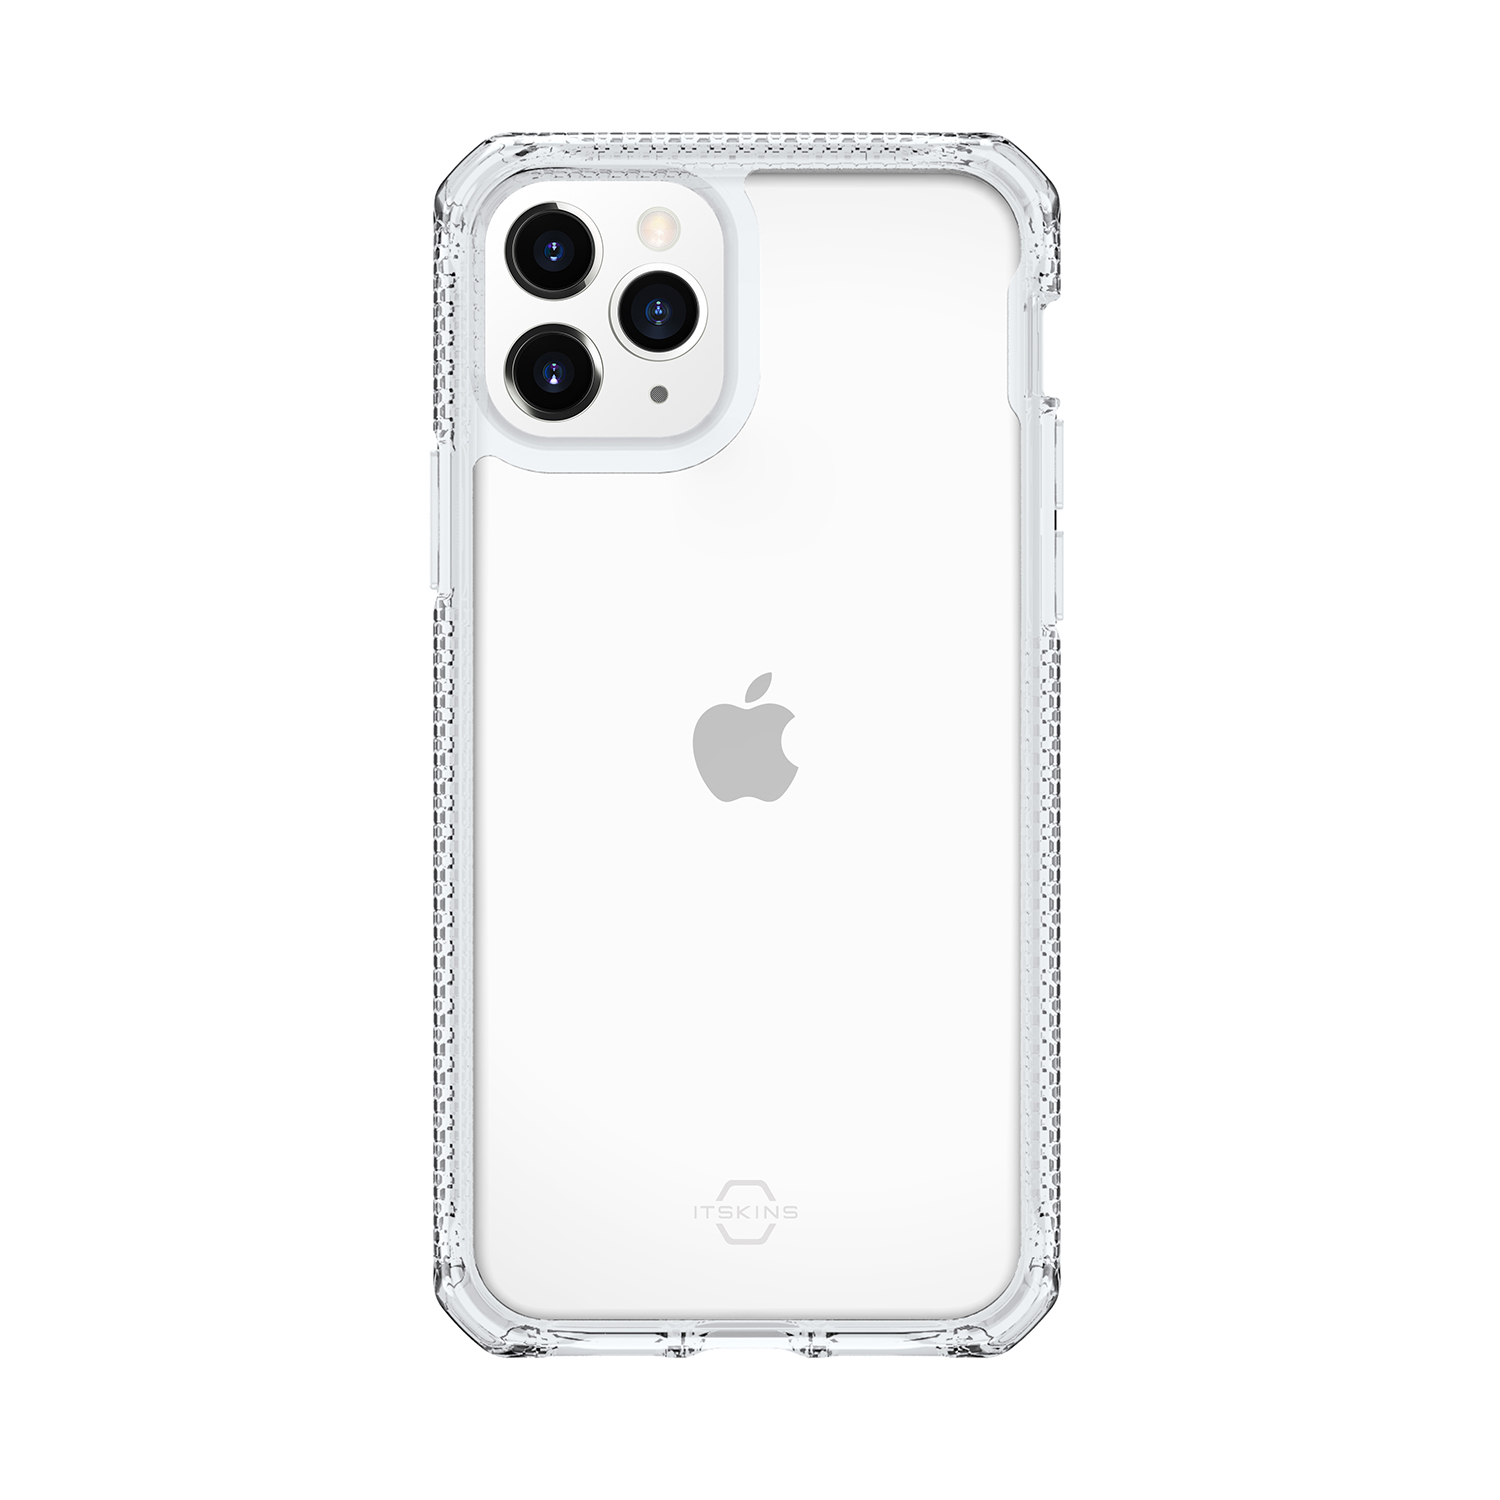 ITSKINS Hybrid Clear Case for iPhone 11, 11 Pro & 11 Pro Max